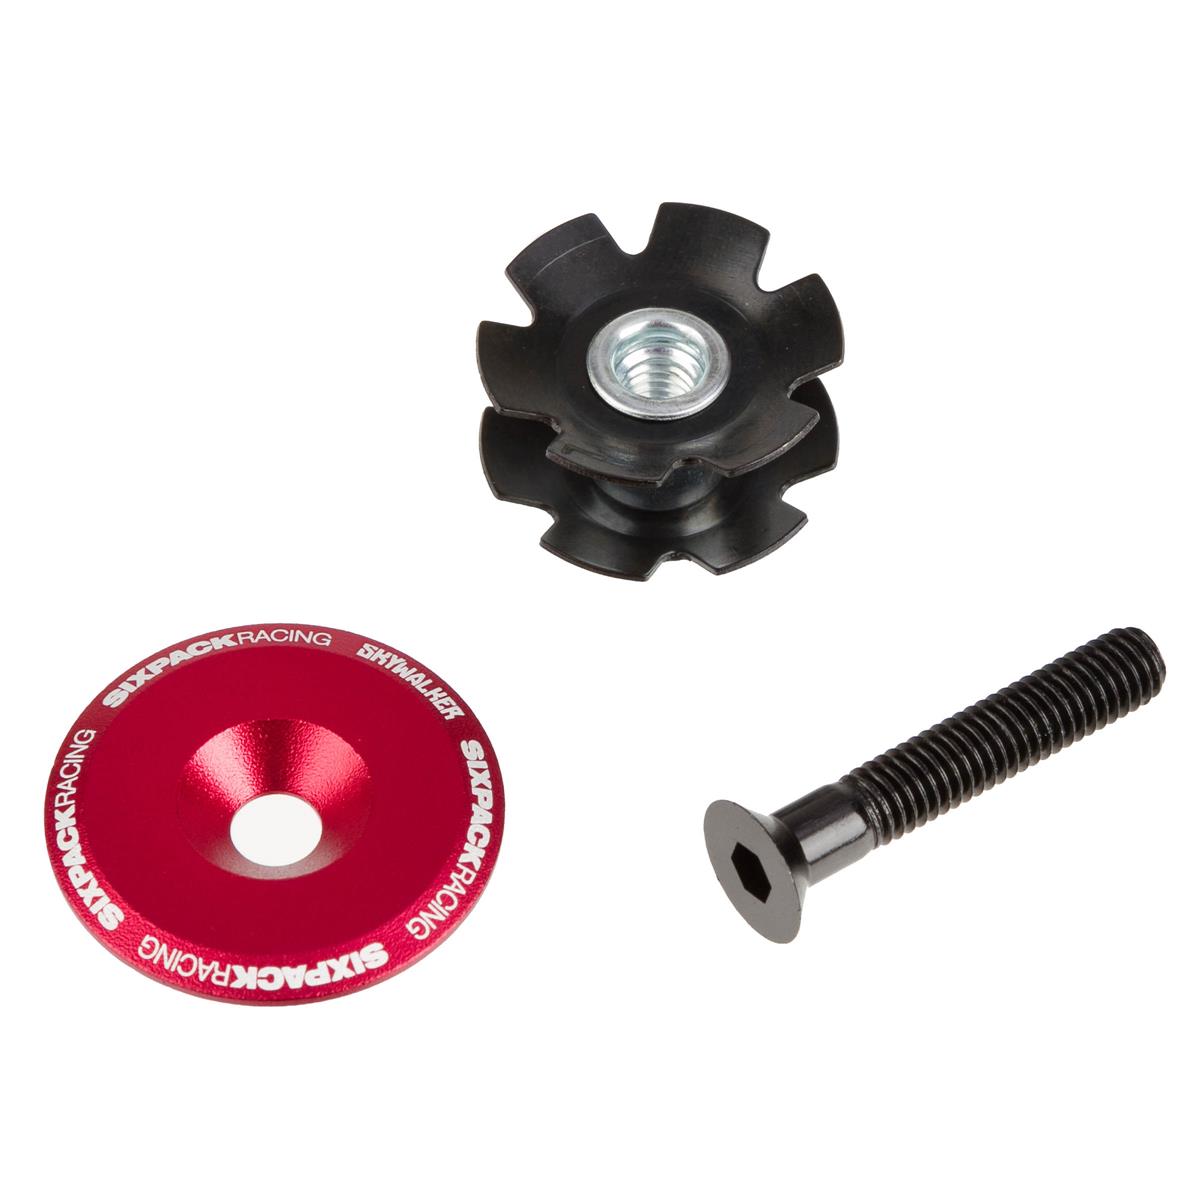 Sixpack Ahead Cap Skywalker Stealth Red, 1-1 1/8 Inches incl. Bolt